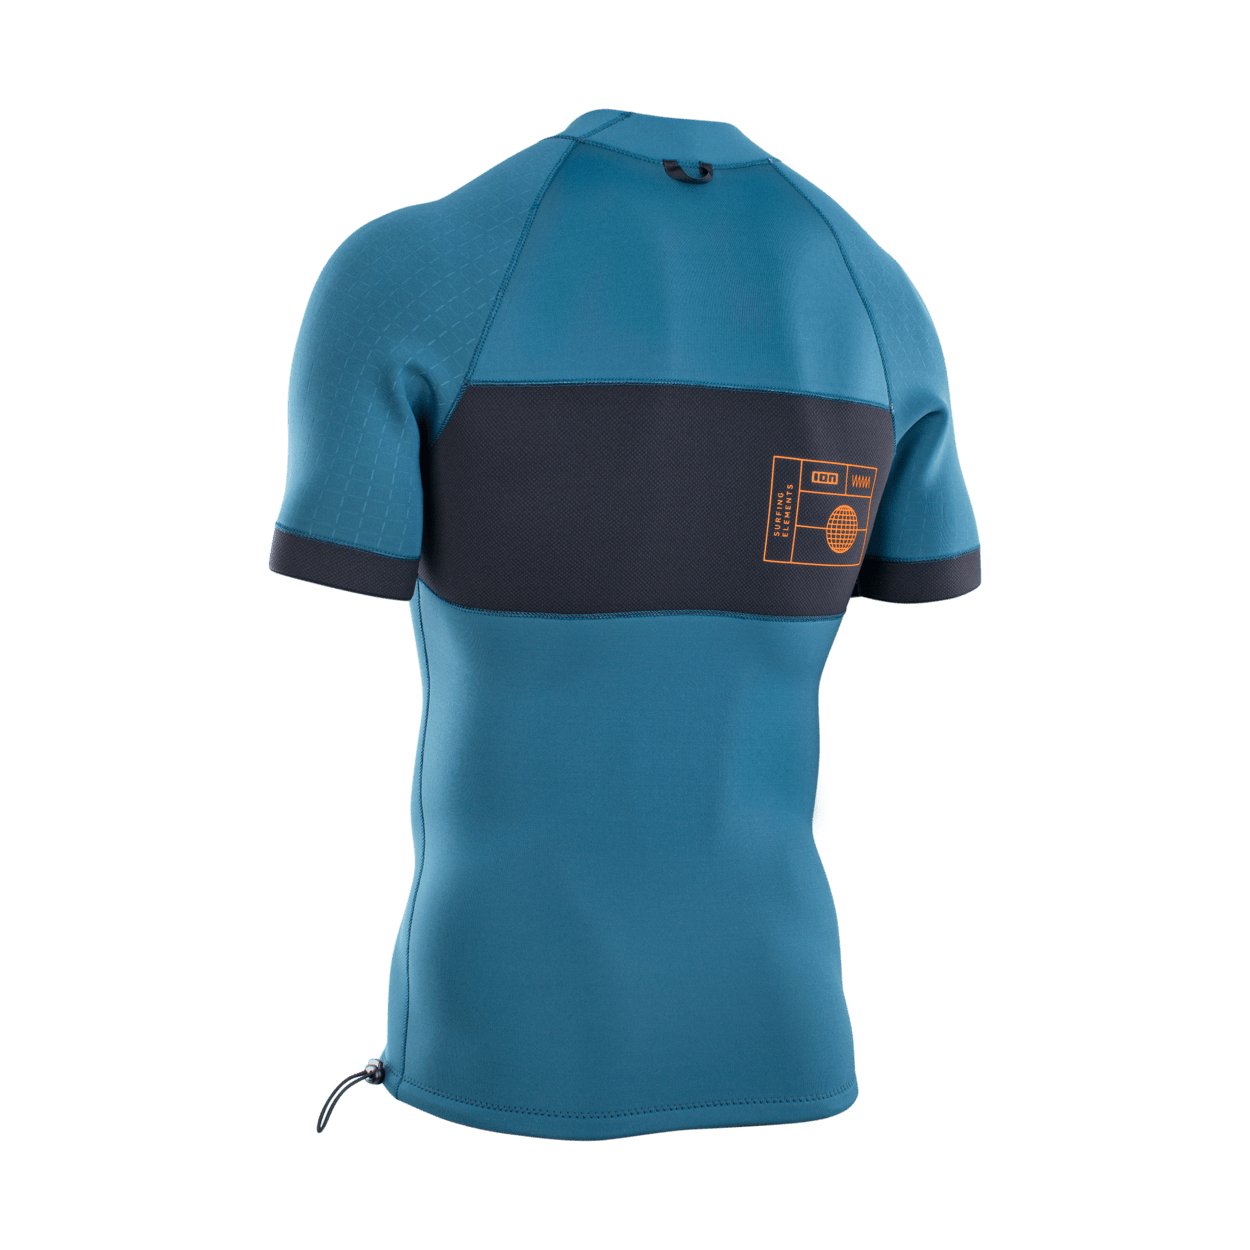 ION Neo Top 2/2 SS men 2022 - Worthing Watersports - 9010583058726 - Tops - ION Water